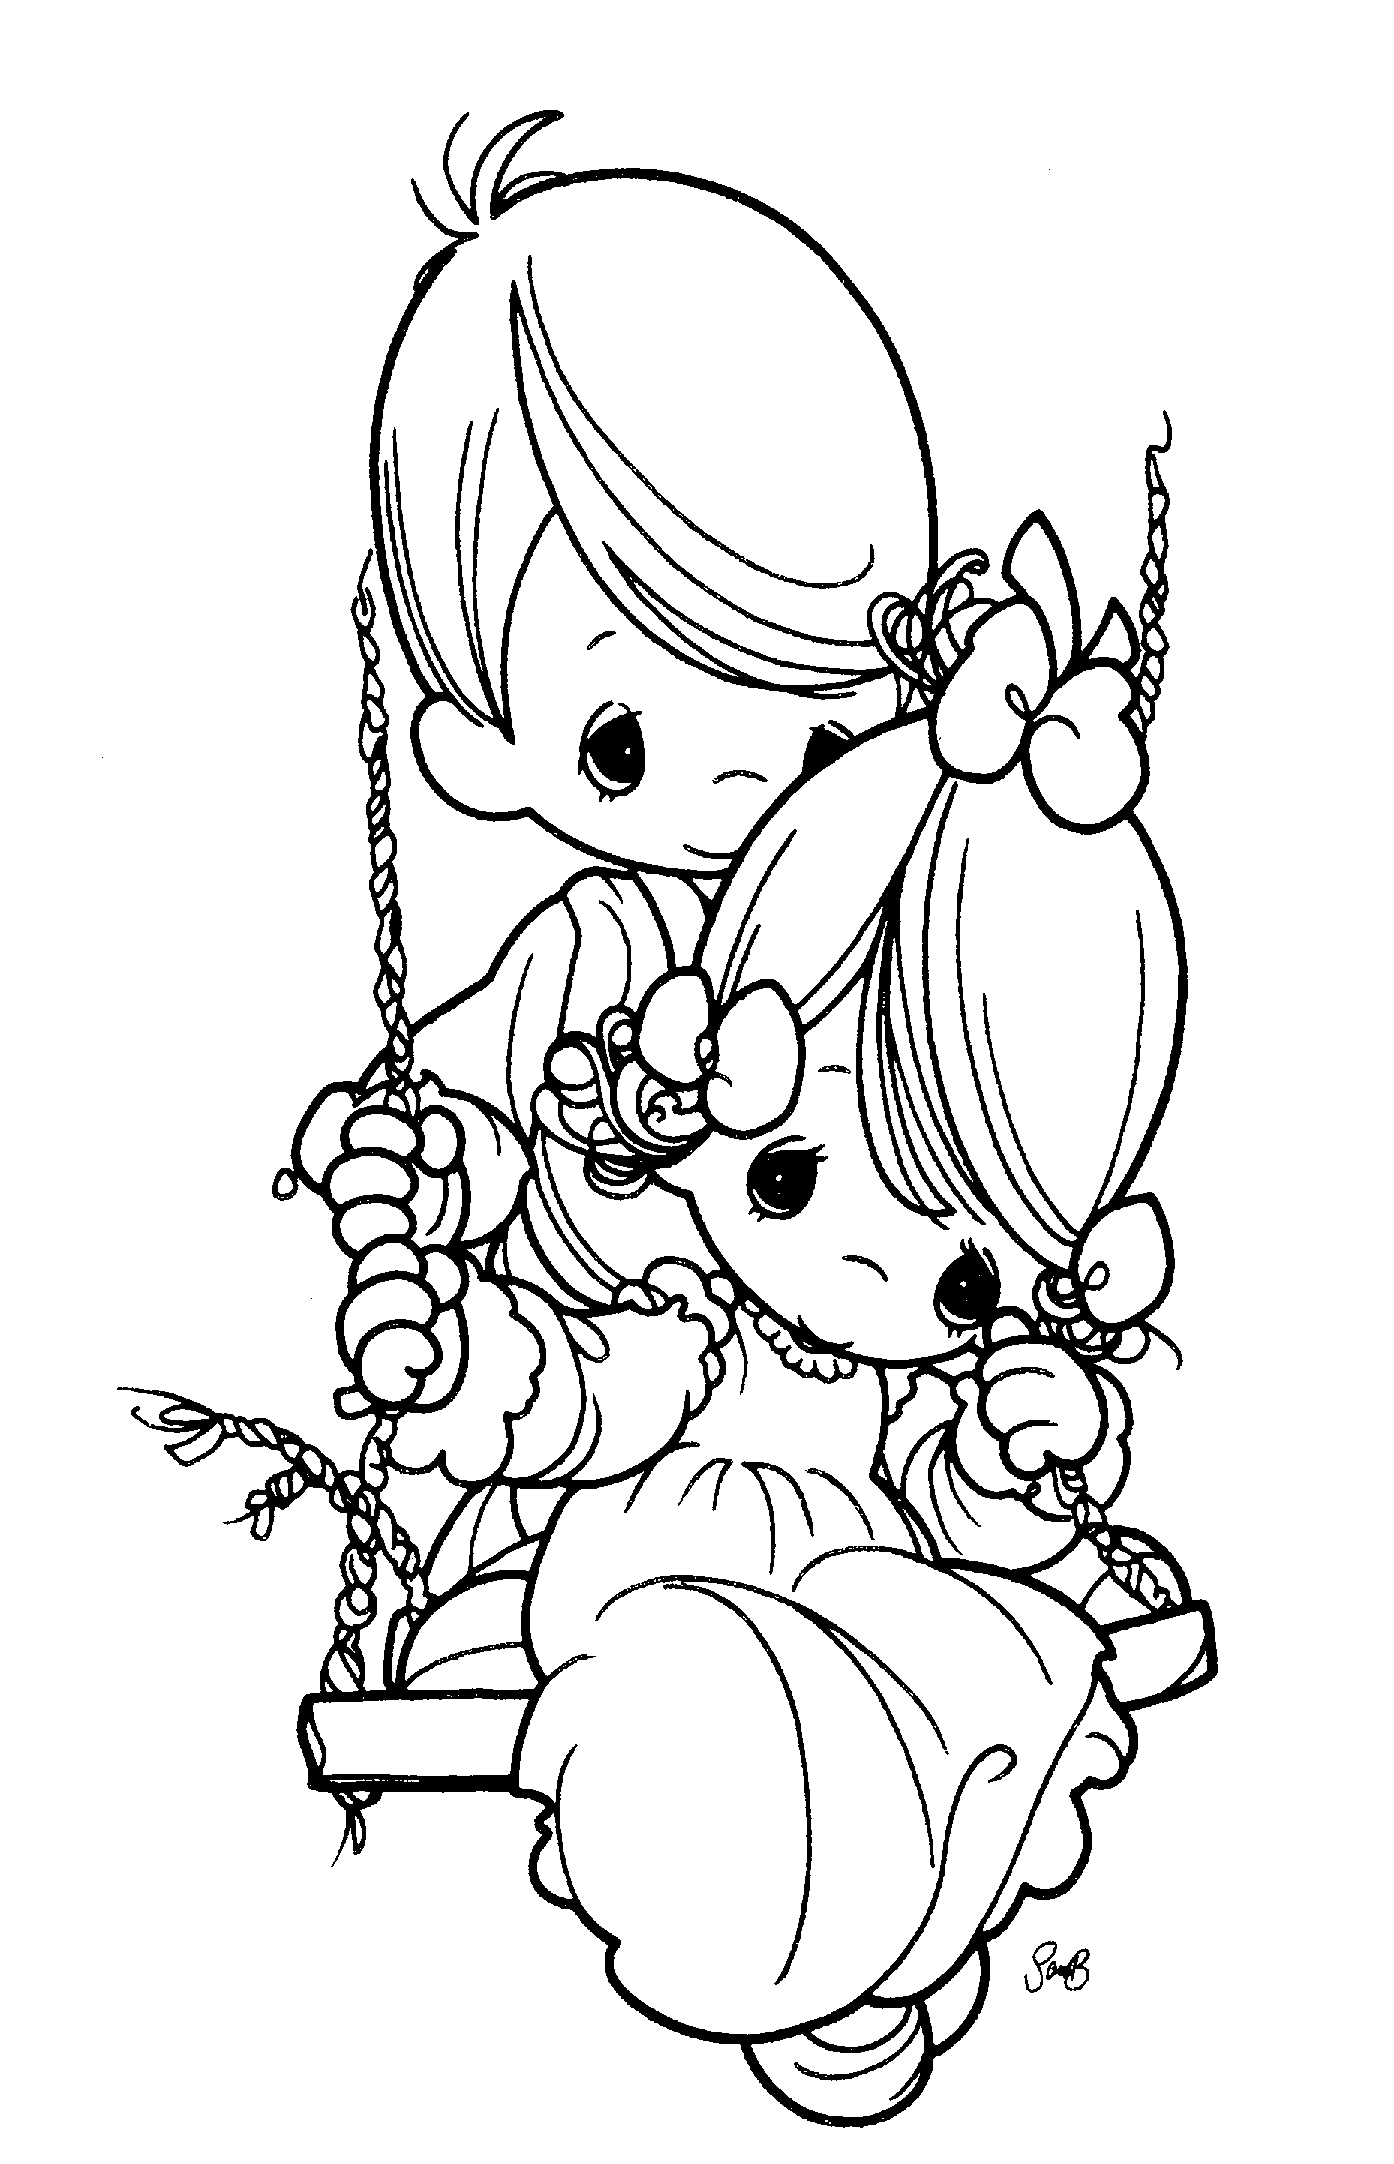 Precious Moments Letters Coloring Pages Free Printable Precious Moments Coloring Pages For Kids